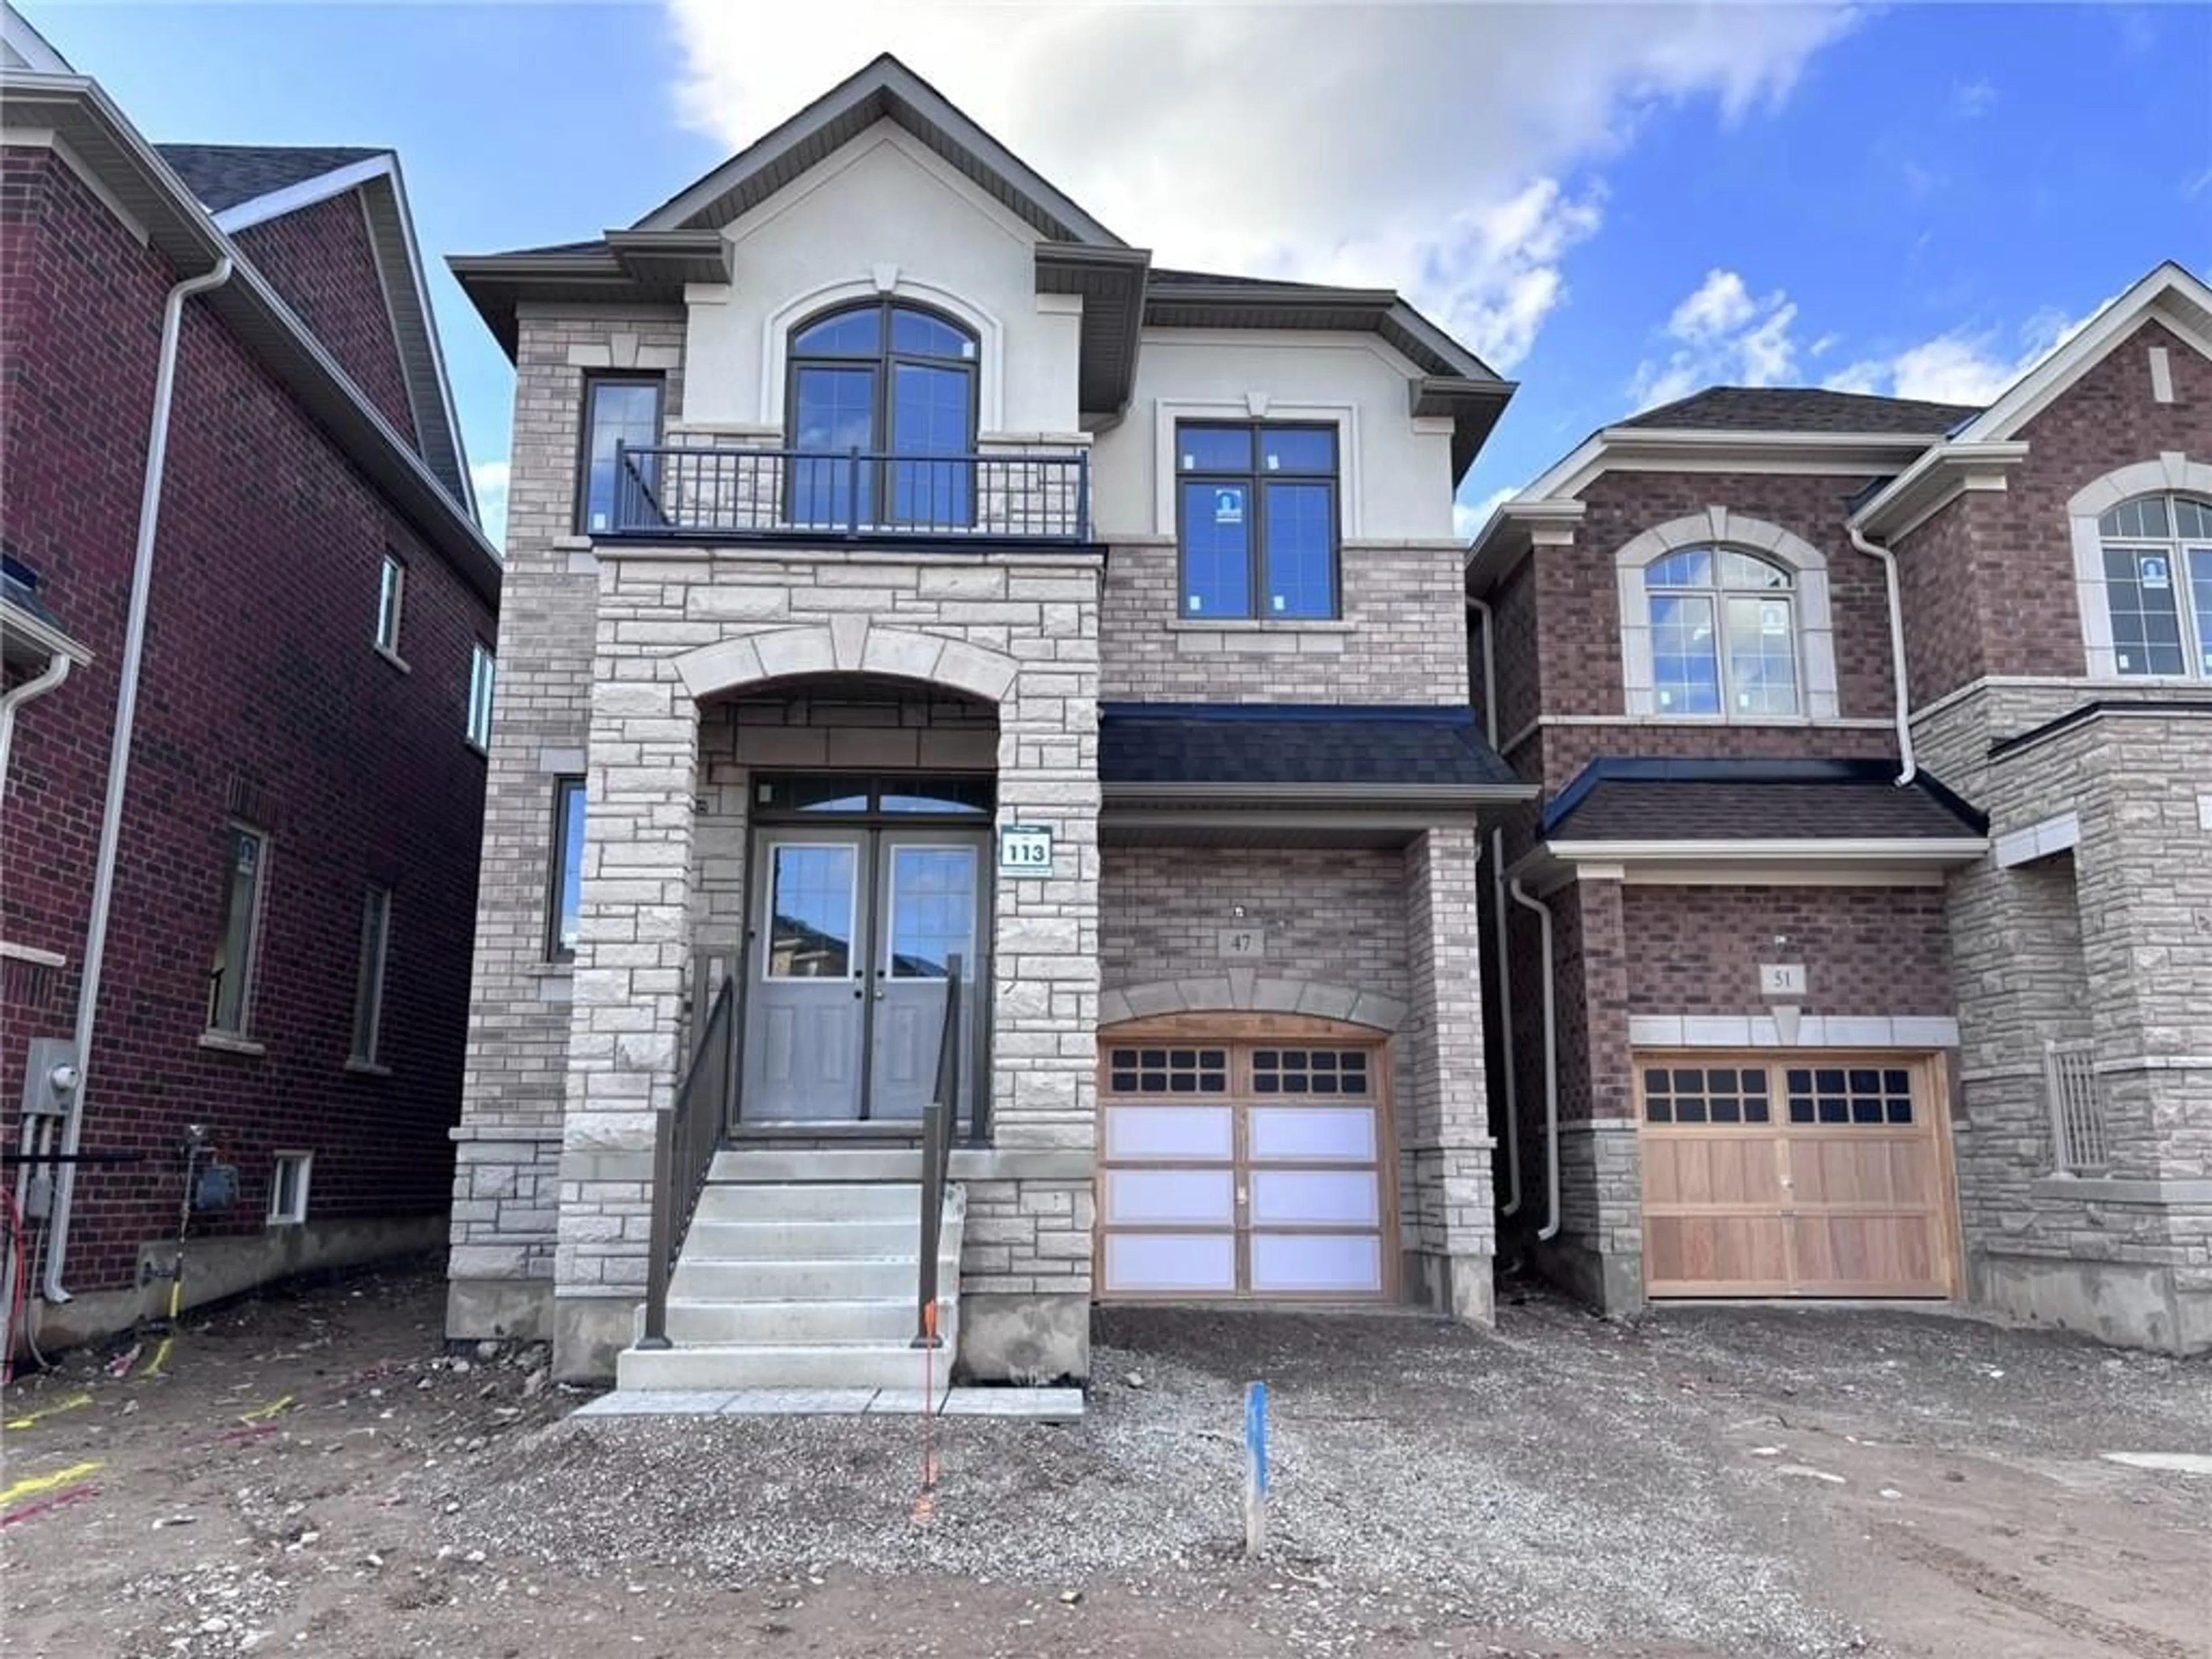 Home with brick exterior material for 47 Bloomfield Cres, Cambridge Ontario N1R 0E9